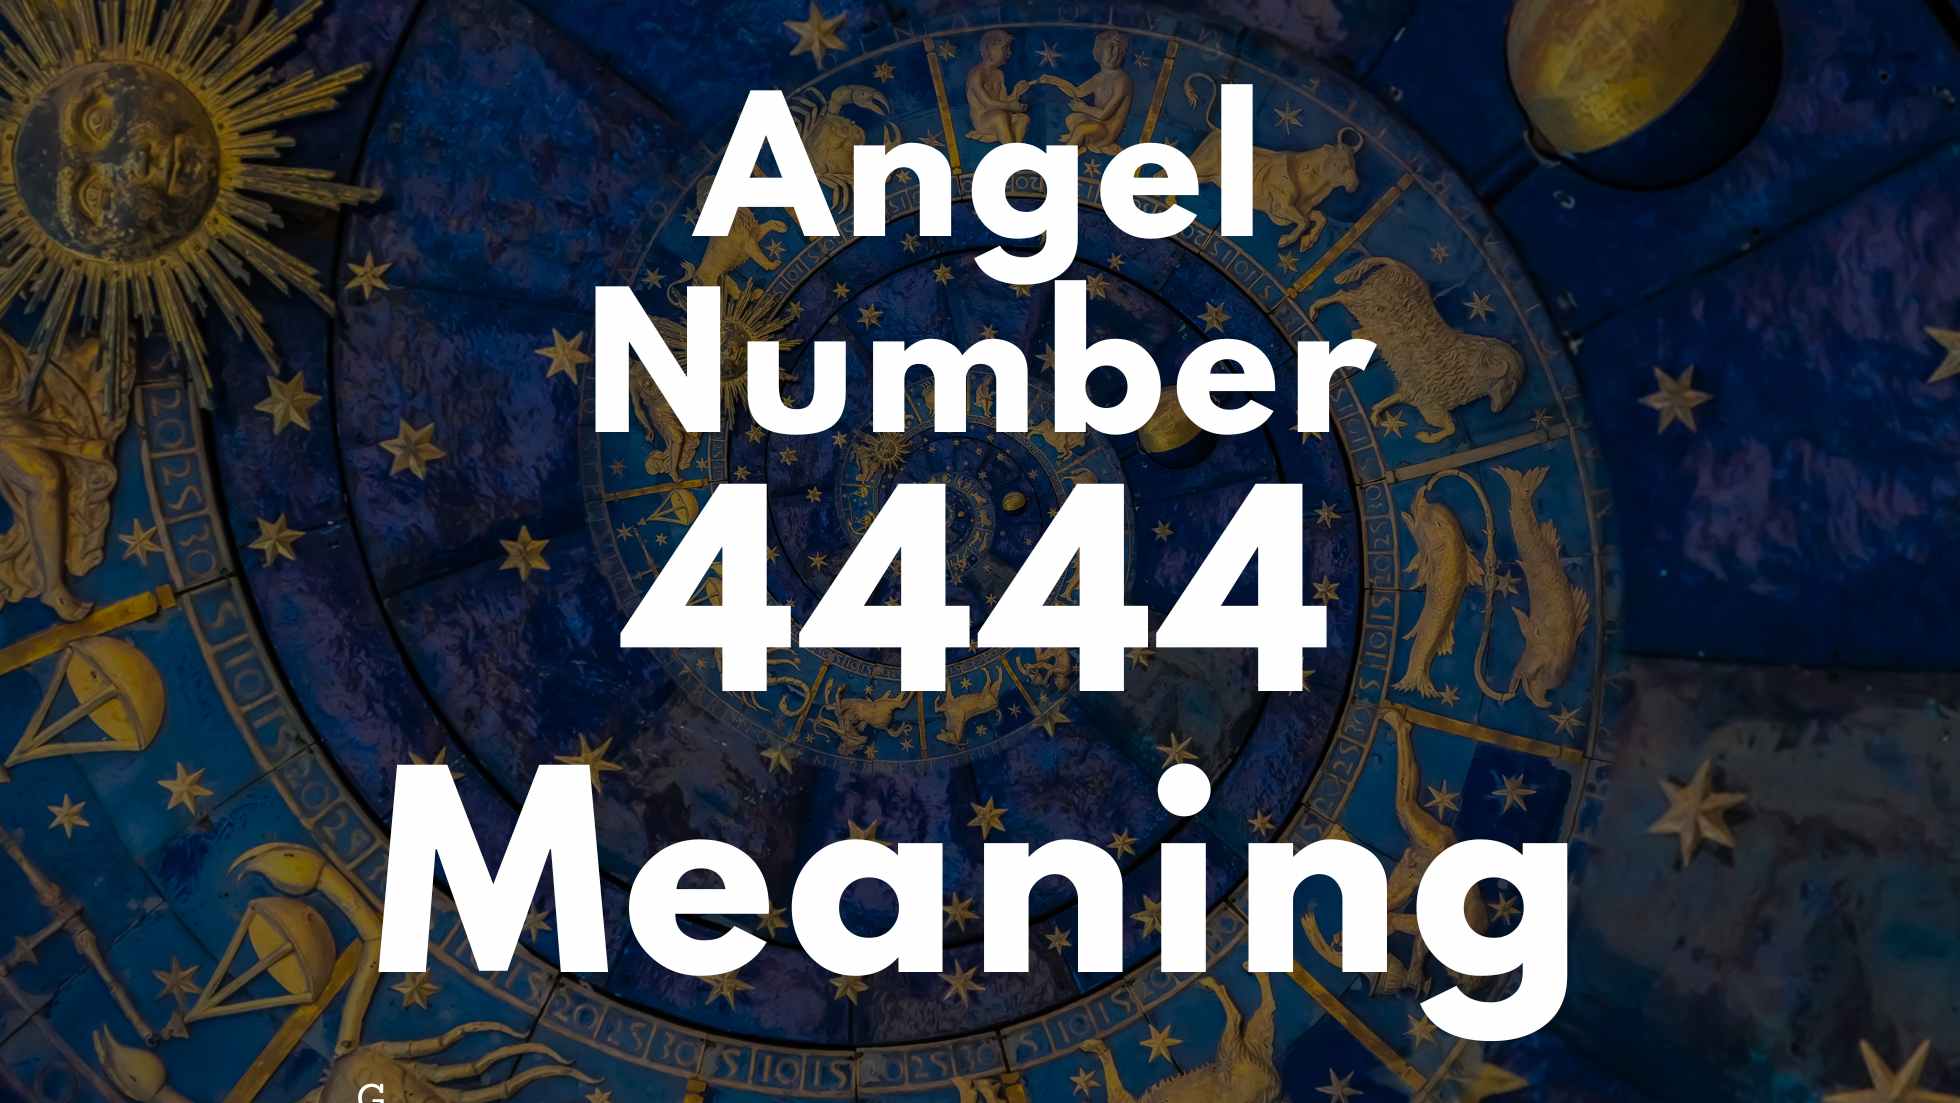 Angel Number 4444 Spiritual Meaning, Symbolism, and Significance